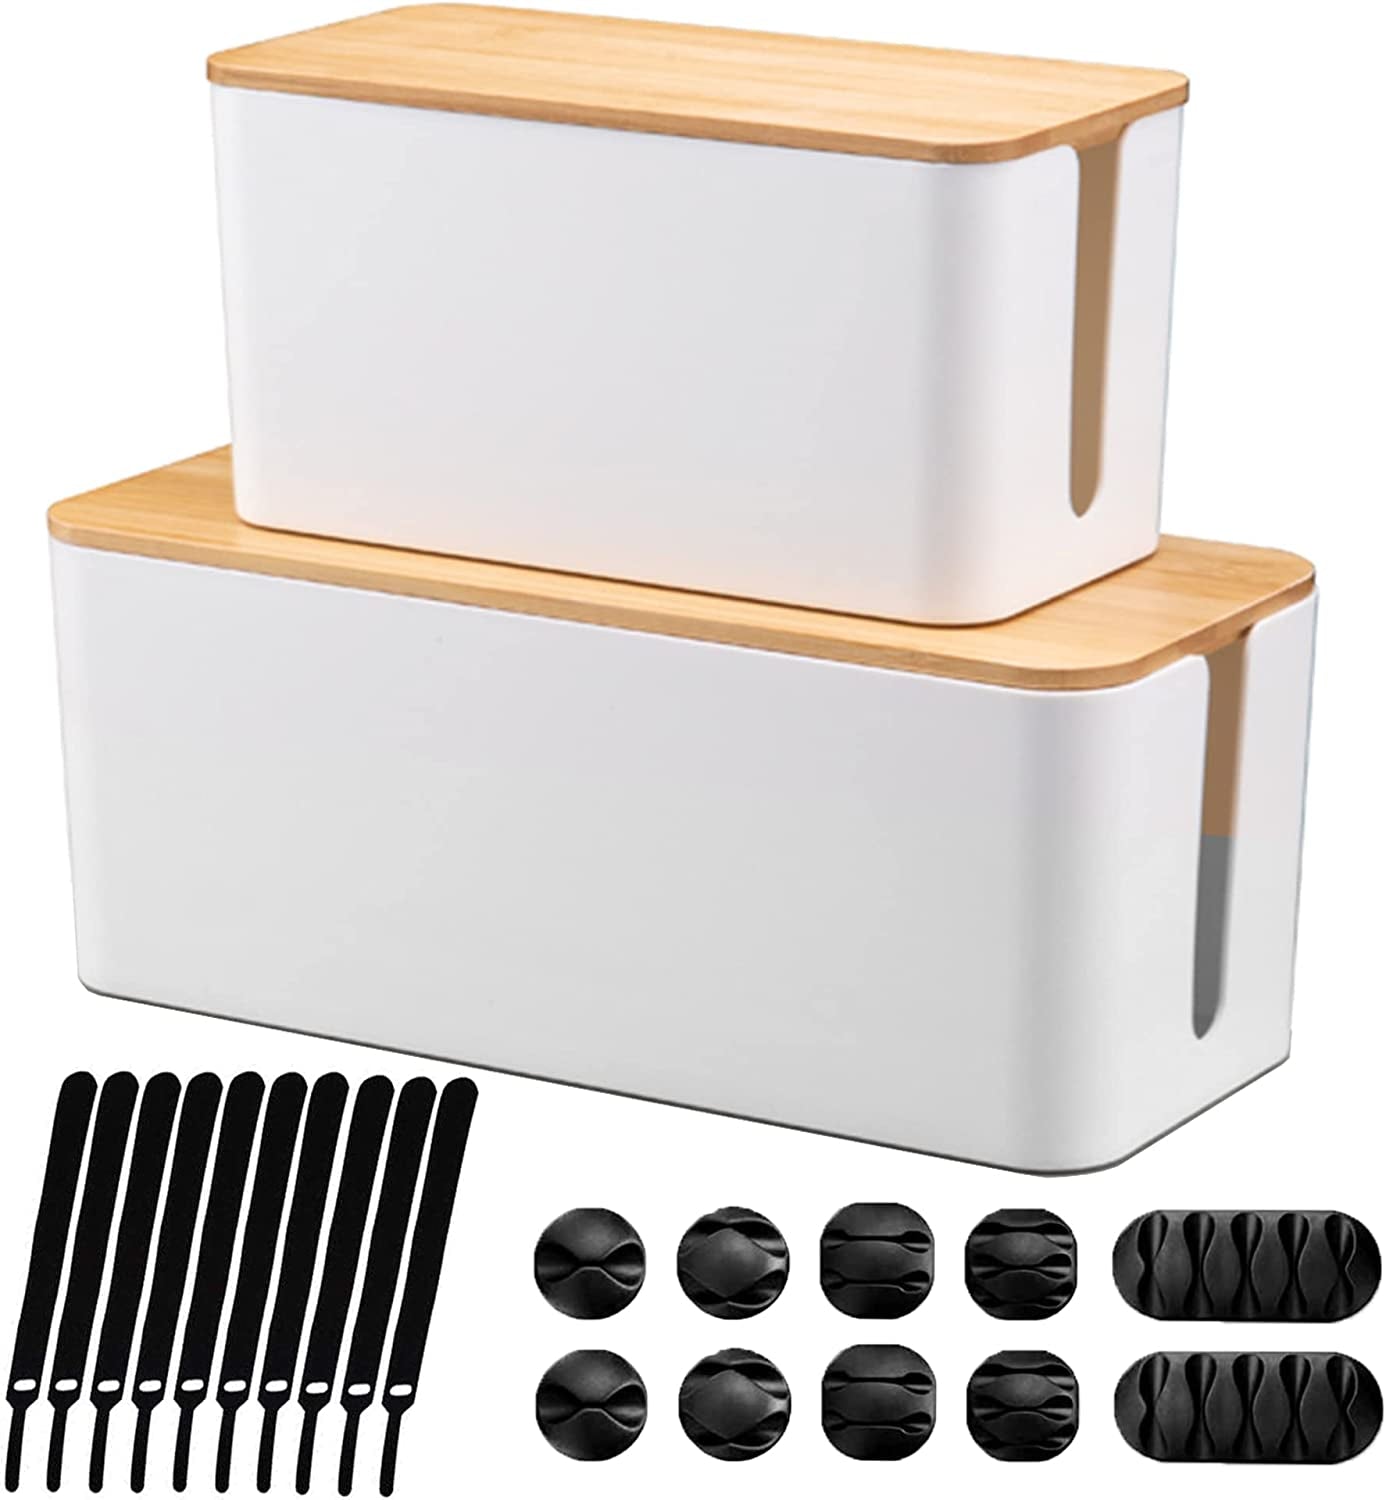 secretgreen.com.au, [Set of 2] Wood Cover Cable Management Box Set with Cable Sleeve Wire Ties Included to Organize Desk Cord Cables, Hide TV Computer Wires, USB Hub Power Strips to Make Home Office Neat (White)